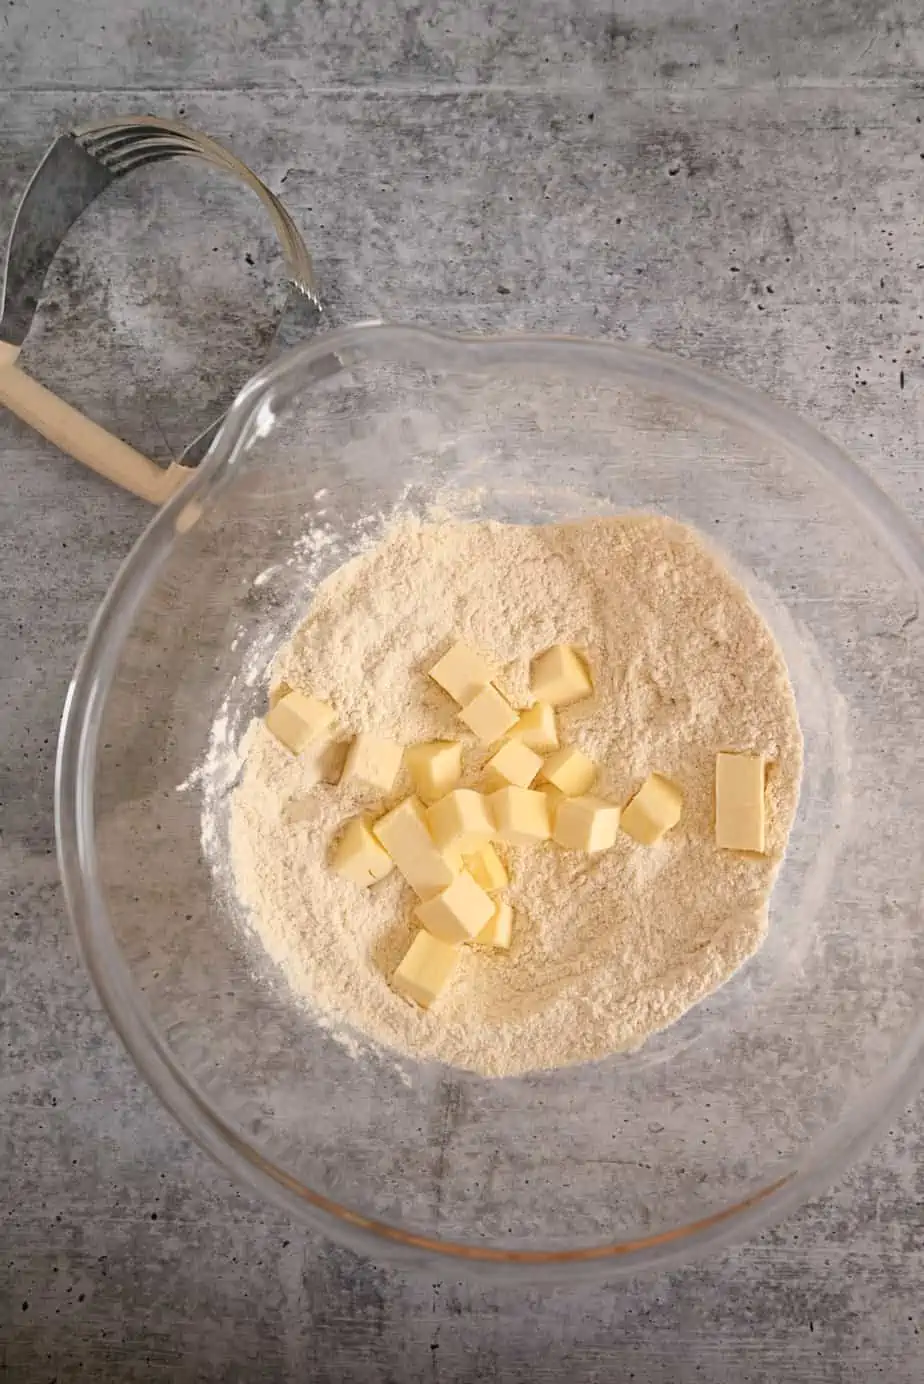 Cubed butter being added to dry ingredients in a glass mixing bowl.